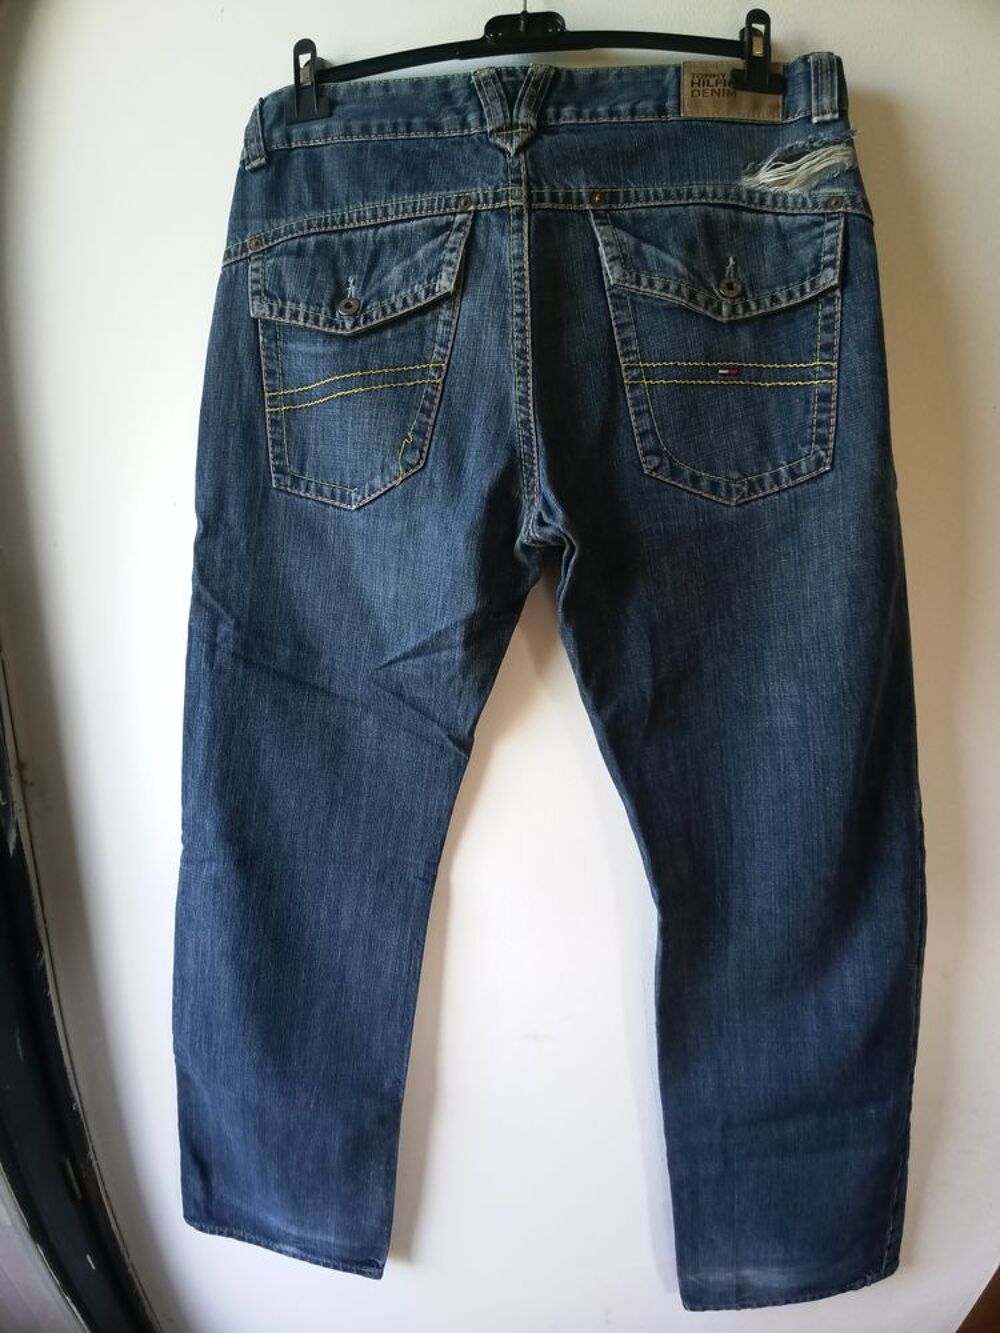 Jeans Tommy Hilfiger taille 44 Vtements